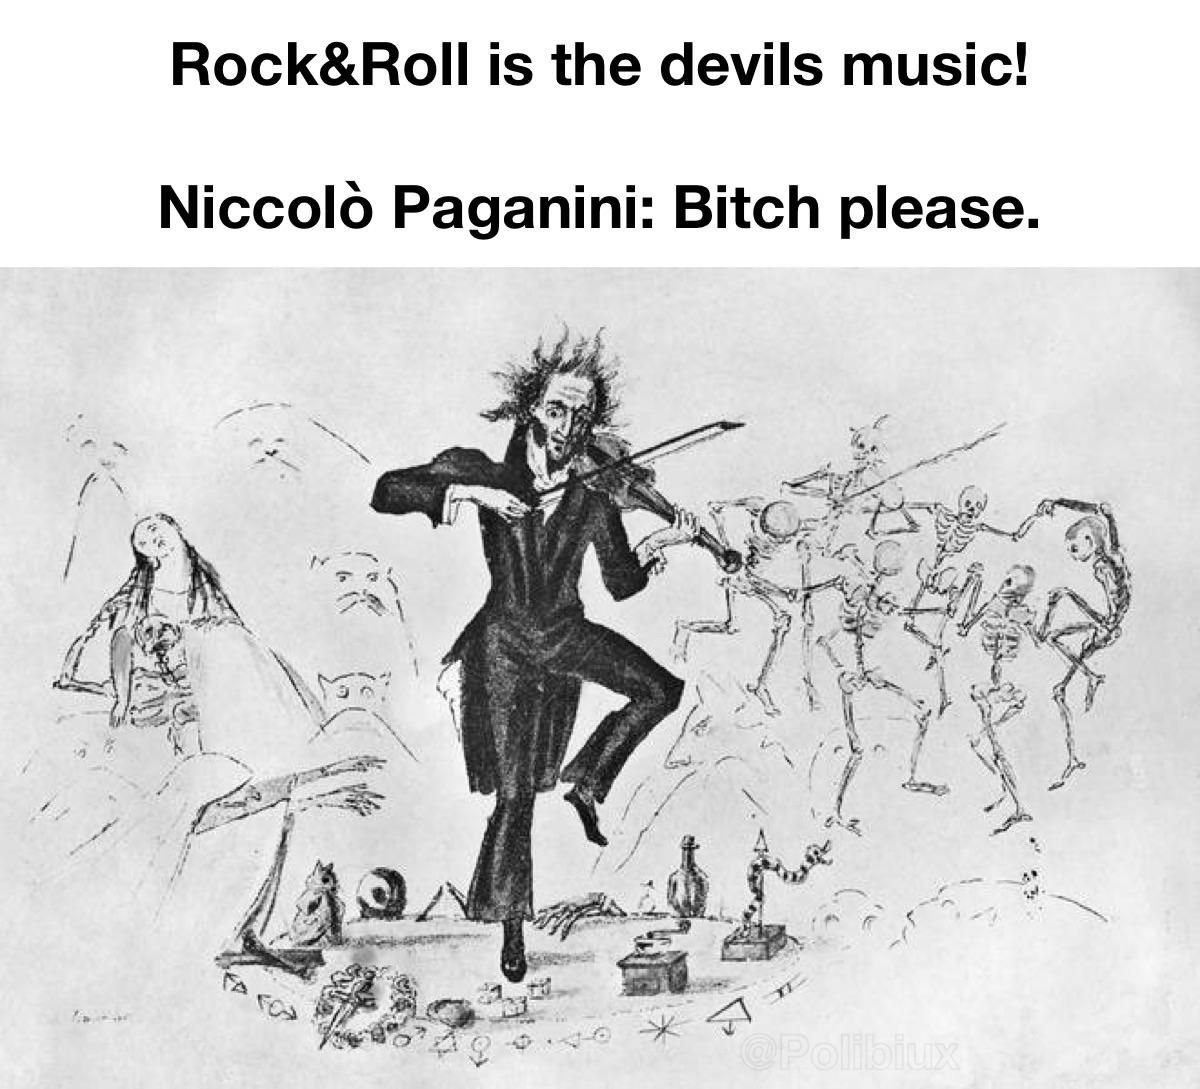 Classical music can get hardcore.